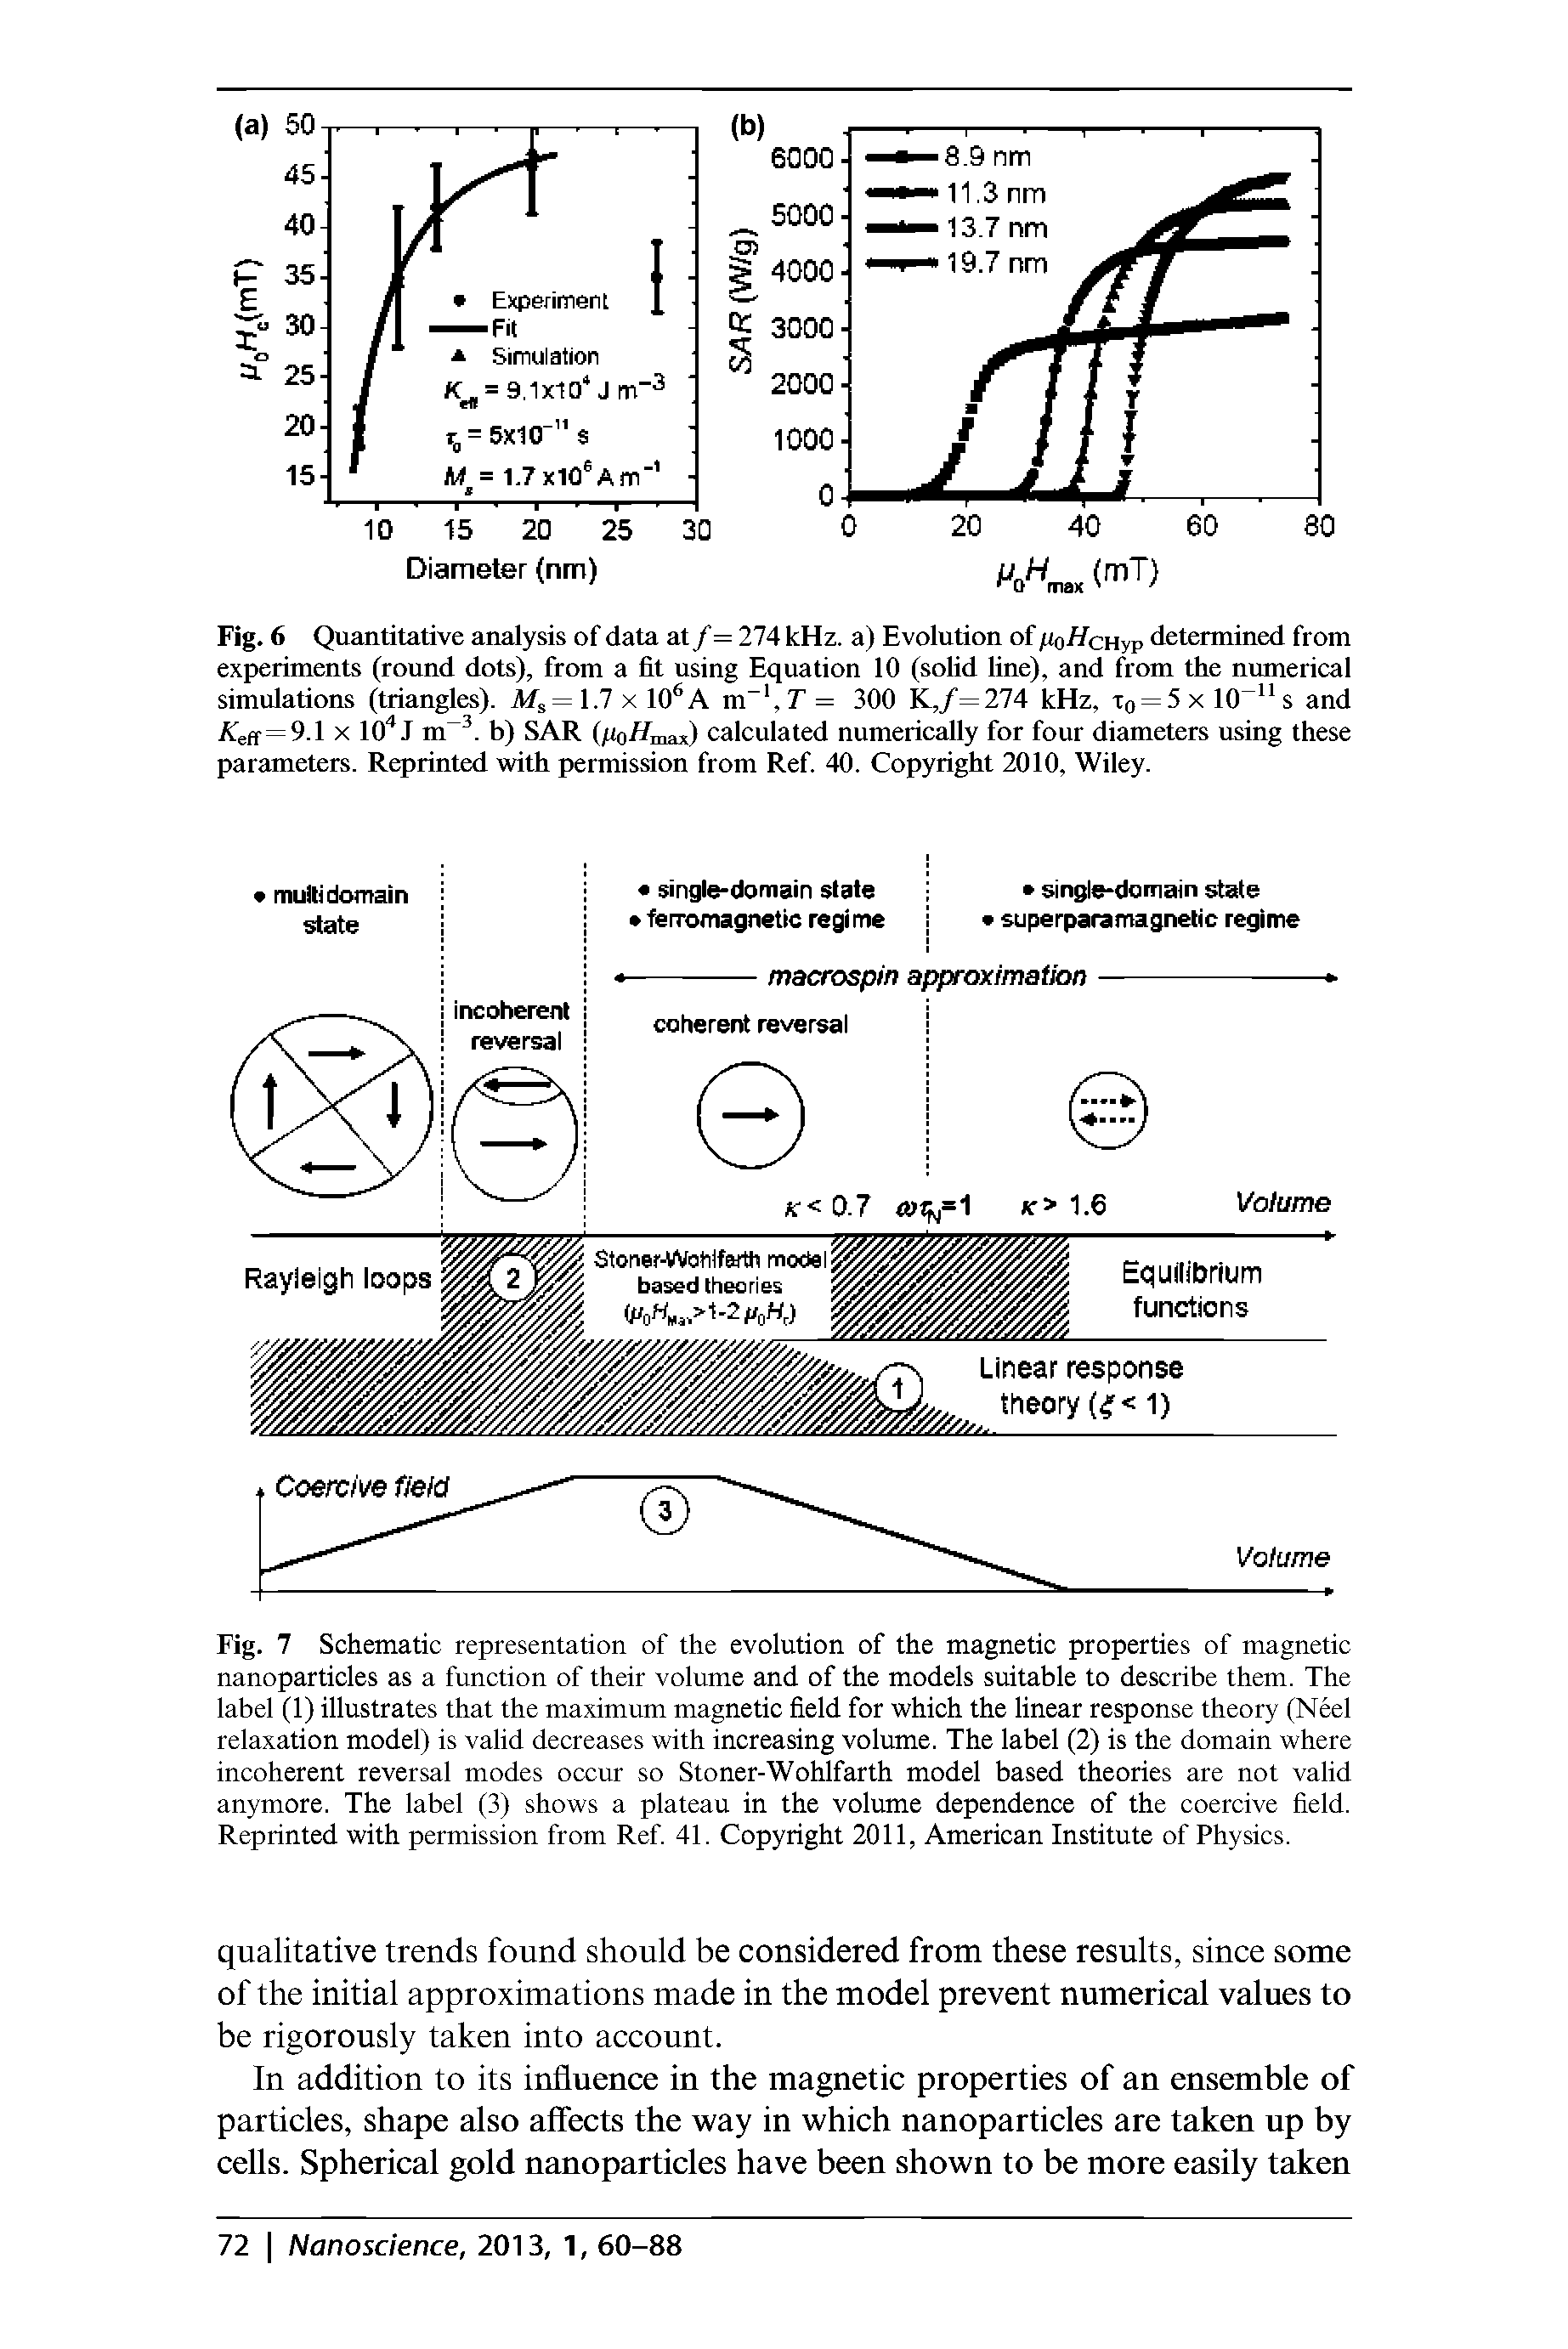 Fig. 7 Schematic representation of the evolution of the magnetic properties of magnetic nanoparticles as a function of their volume and of the models suitable to describe them. The label (1) illustrates that the maximum magnetic field for which the linear response theory (Neel relaxation model) is valid decreases with increasing volume. The label (2) is the domain where incoherent reversal modes occur so Stoner-Wohlfarth model based theories are not valid anymore. The label (3) shows a plateau in the volume dependence of the coercive field. Reprinted with permission from Ref 41. Copyright 2011, American Institute of Physics.